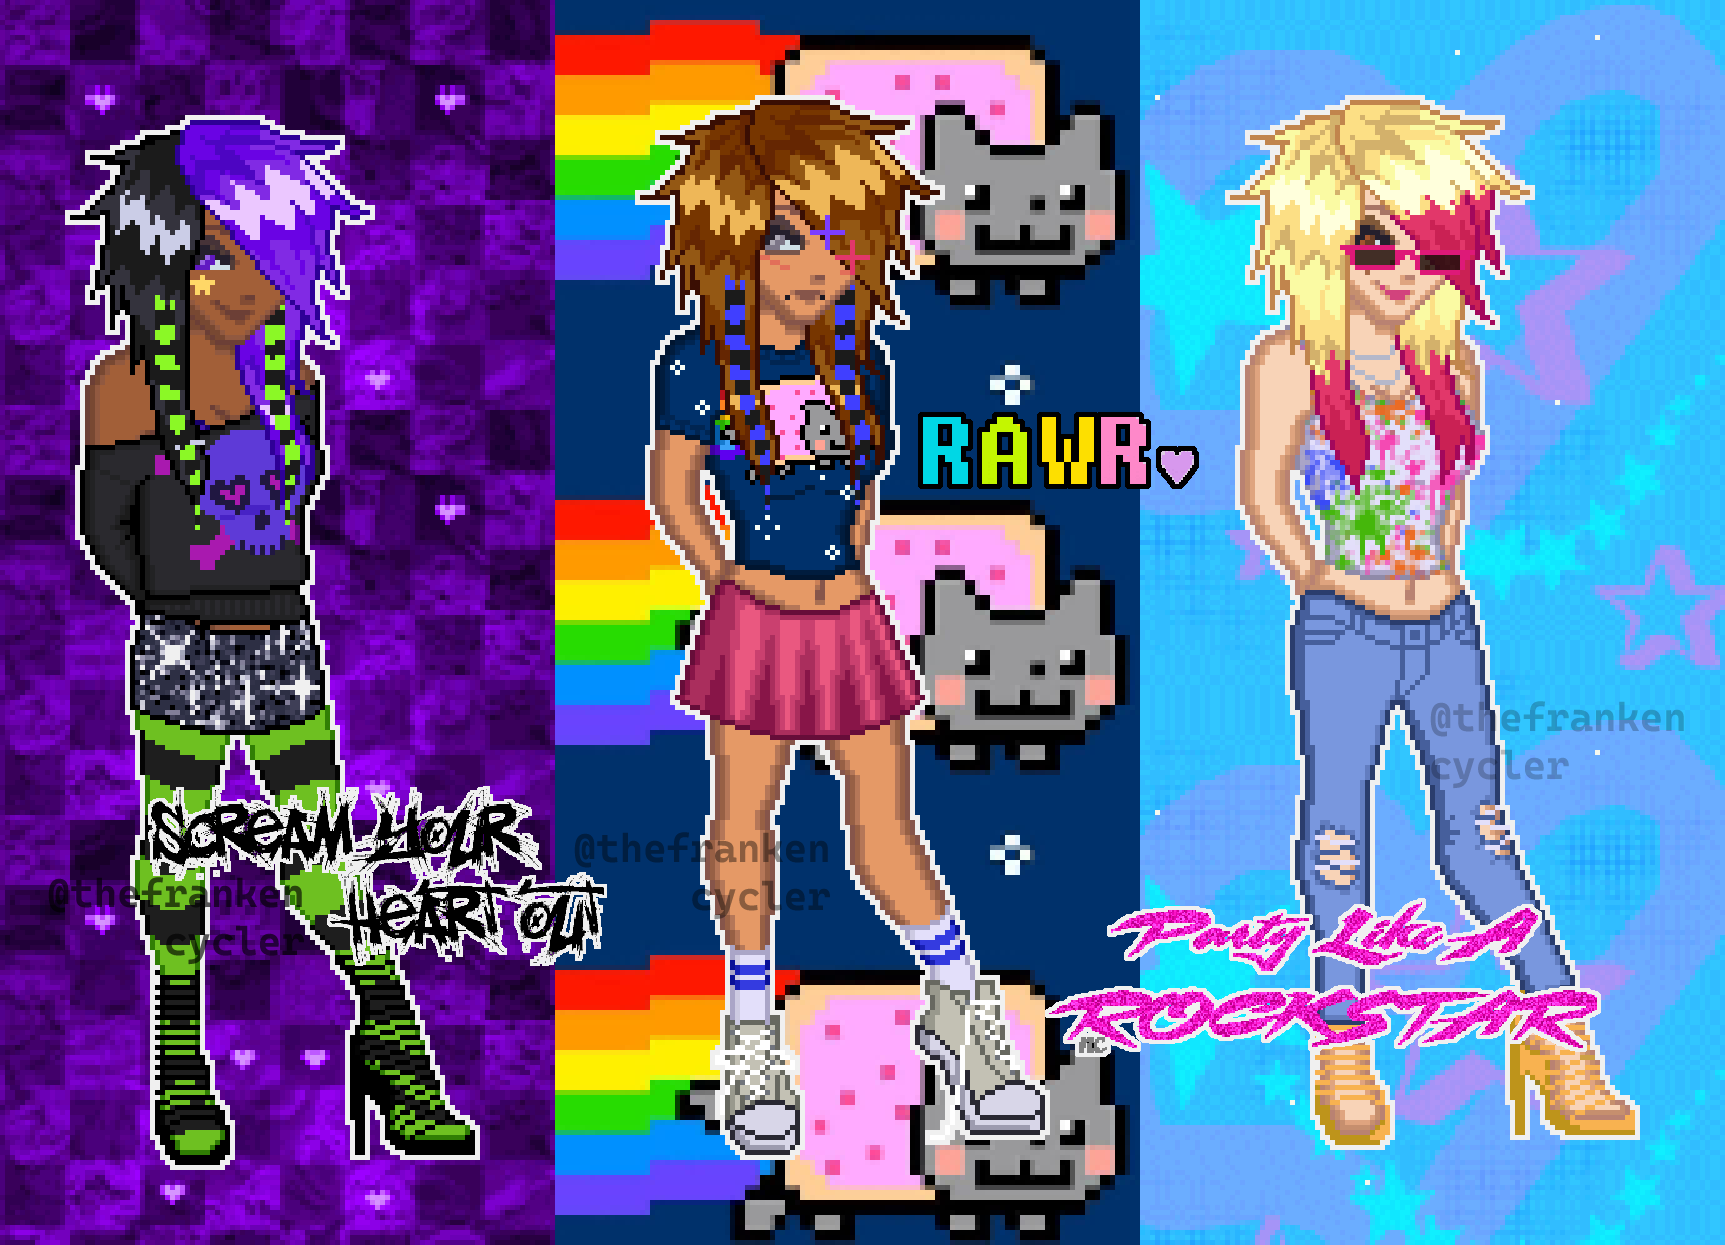 three pixel dolls wearing scene/emo style clothing and haircuts. to the left, a femme dark-skinned person wearing mainly purple and green, and a sweater with a skull on it, is in front of a purple checkerboard background, with text that reads 'scream your heart out.' in the middle, a femme person with a tan skintone wearing blue and pink, with nyan cat on her t-shirt and nyan cat in the background, and with text that reads 'rawr.' and on the right, a femme light-skinned person in jeans and a splatterpaint top, in front of a background of blue and pink hearts, and with text reading 'party like a rockstar.'